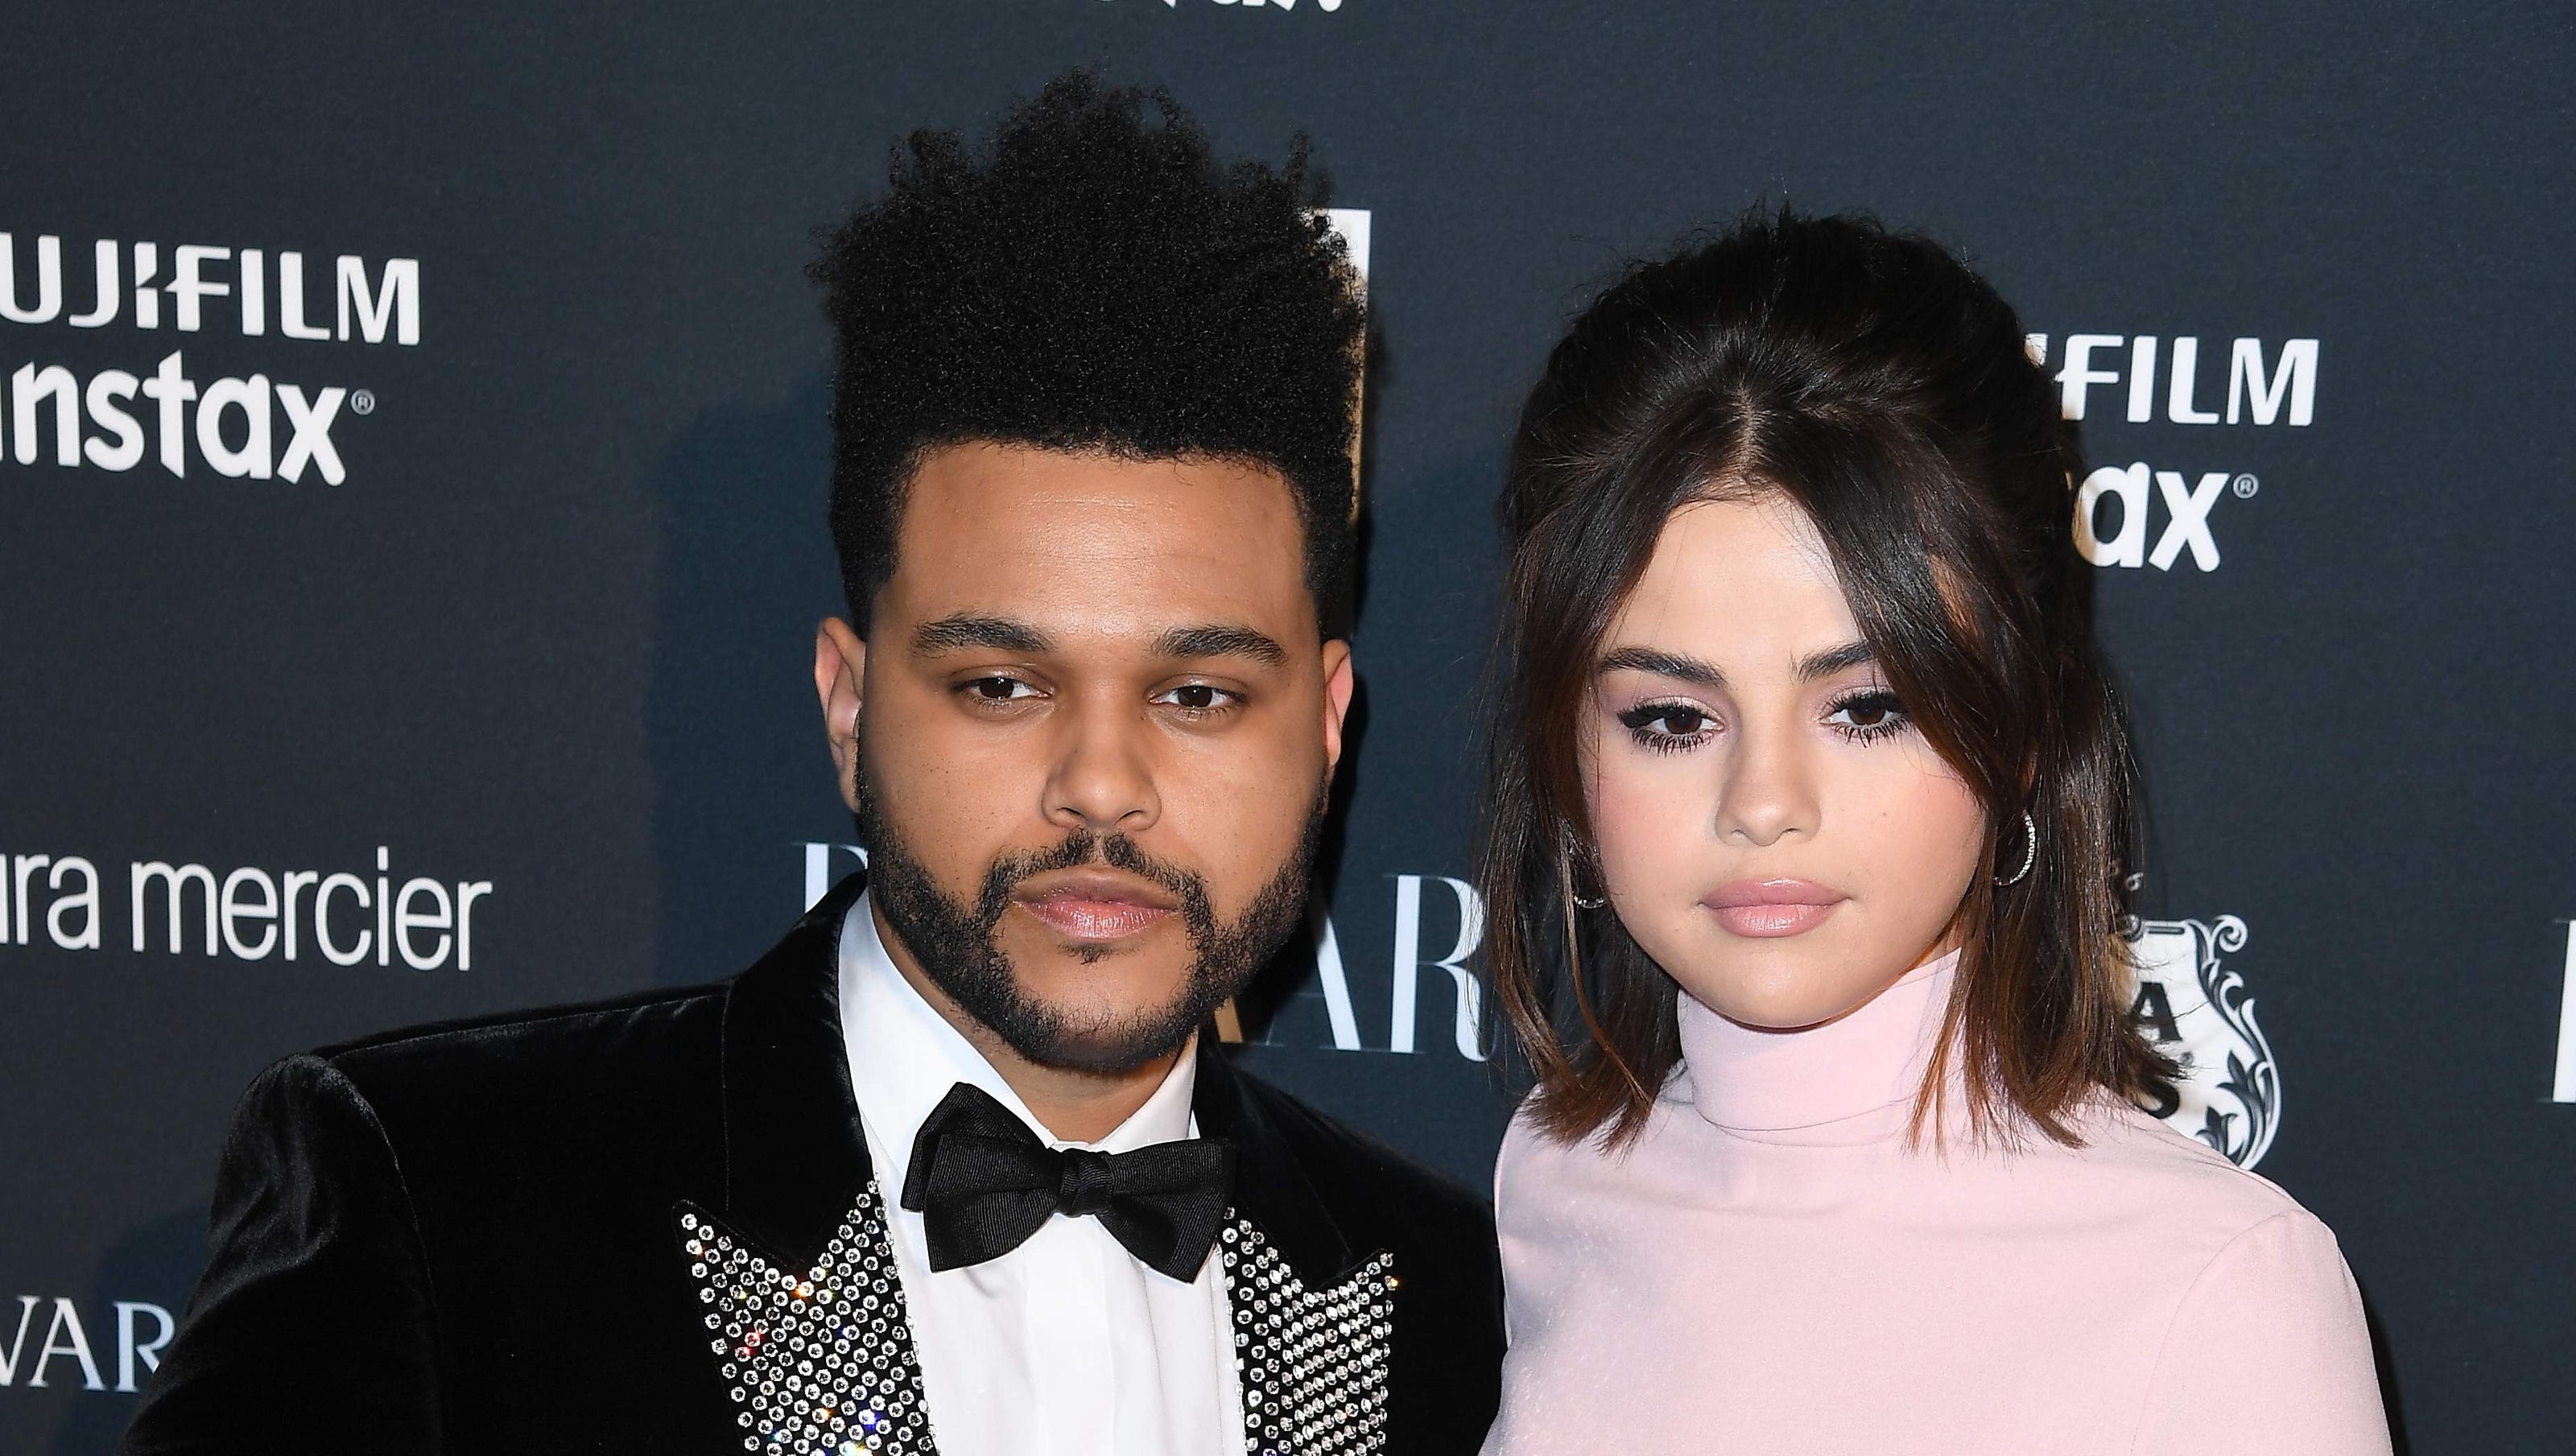 derefter Anbefalede Søndag Is The Weeknd's 'Call Out My Name' about Selena Gomez? Twitter: Yes